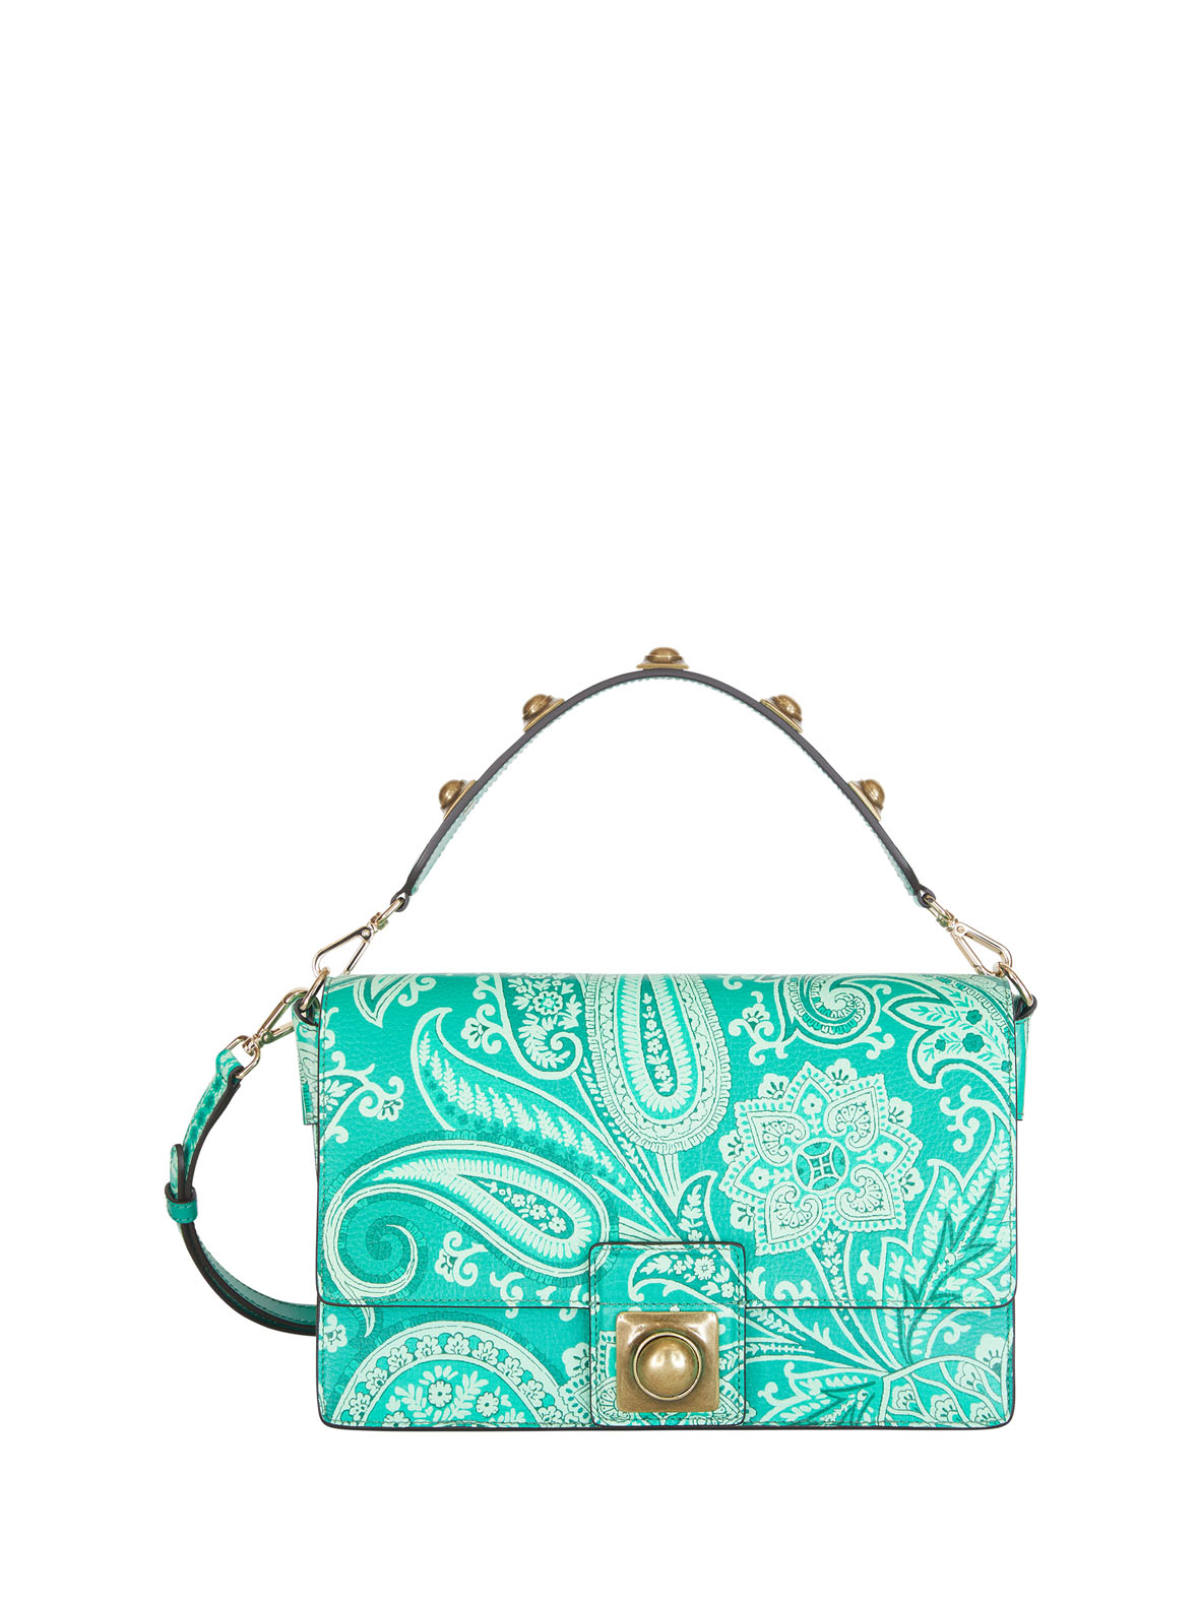 Etro Launched The New Crown Me Flap Bag